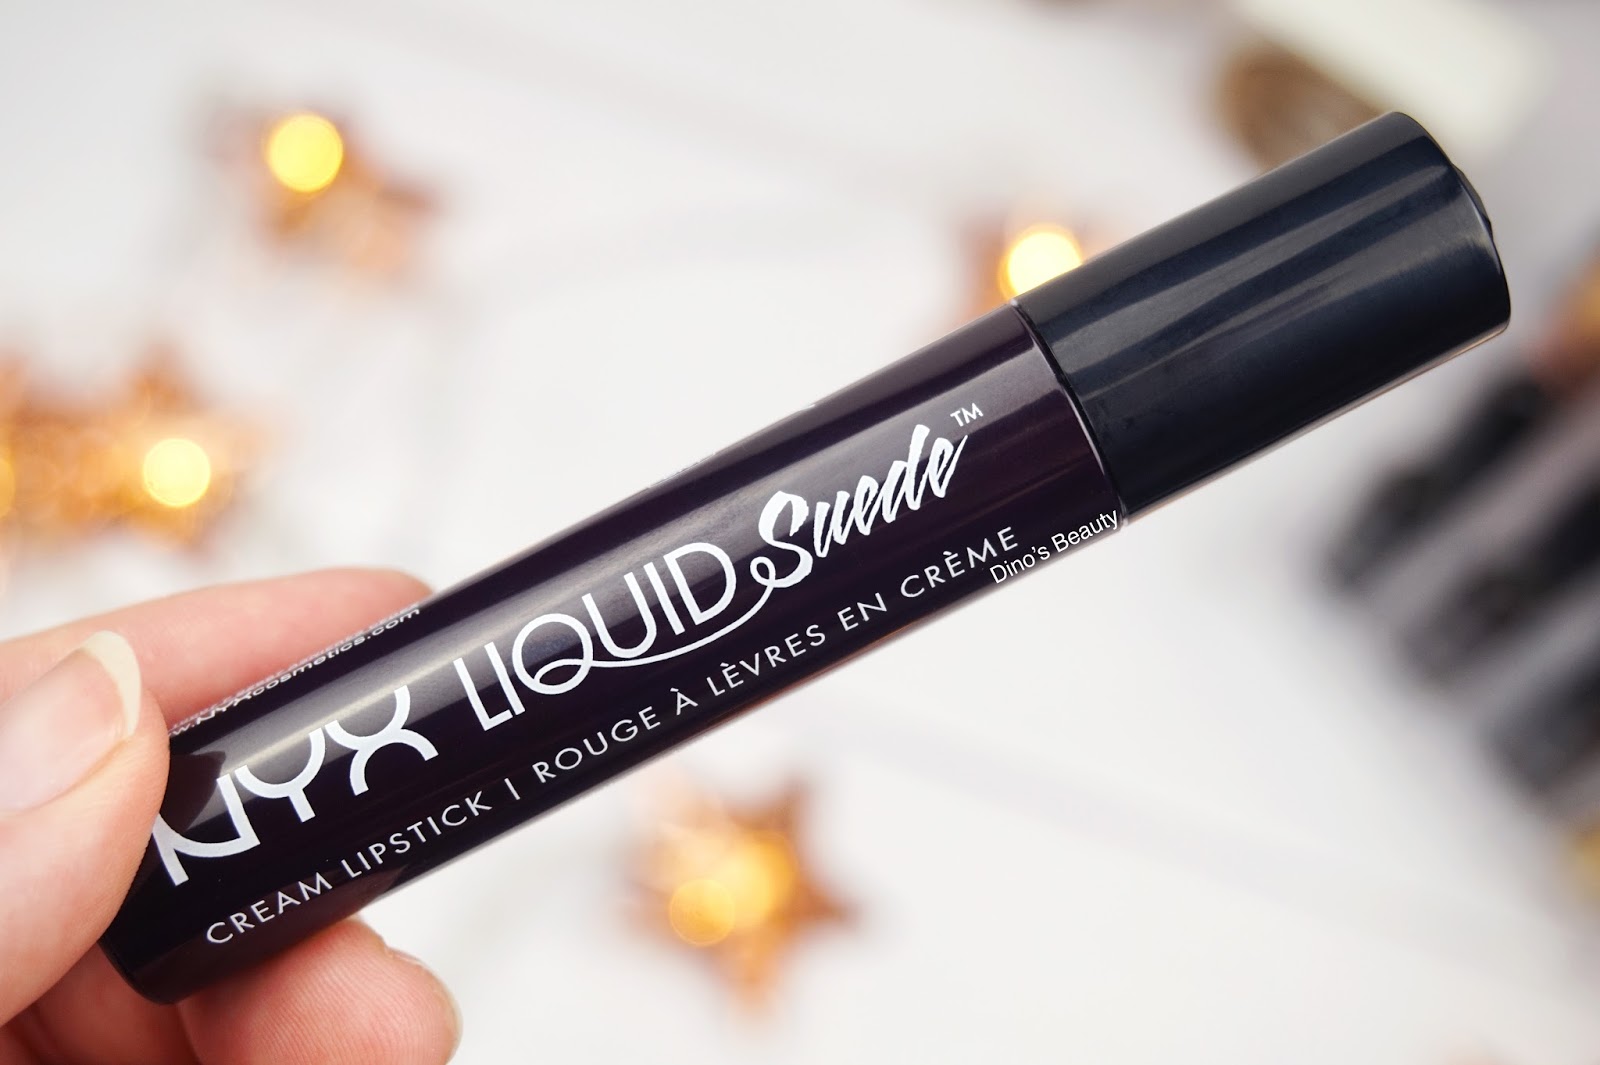 Nyx, Liquid Suede, Nyx Liquid Suede, Cream Lipsticks, Liquid Lipsticks, Lipstick, Cream, Soft Spoken, Cherry Skies, Oh Put It On, Red Lips, Nude Lips, Plum Lips, Purple, Plum, Nude, Mauve, Red, Cherry, bbloggers, beauty, beauty bloggers, beauty review, review, makeup, makeup review, swatches, Review 